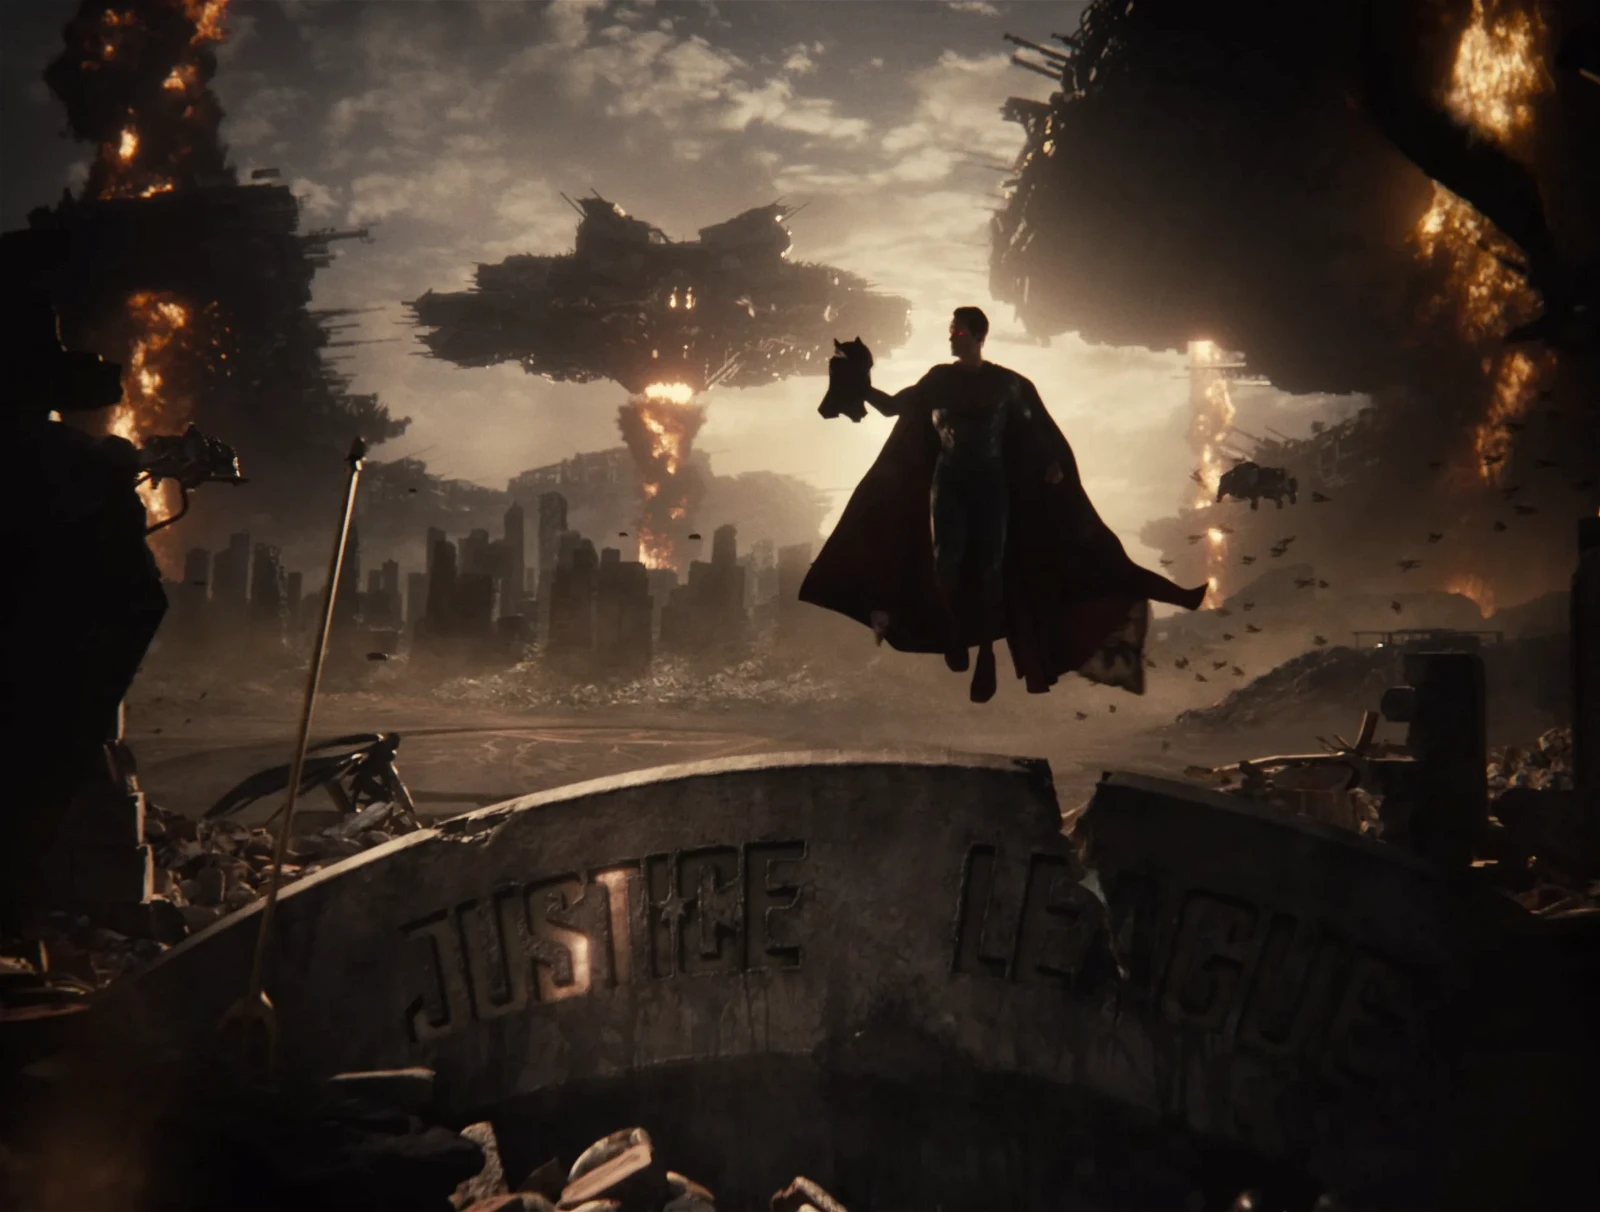 The Nightmare sequence from Zack Snyder's Justice League